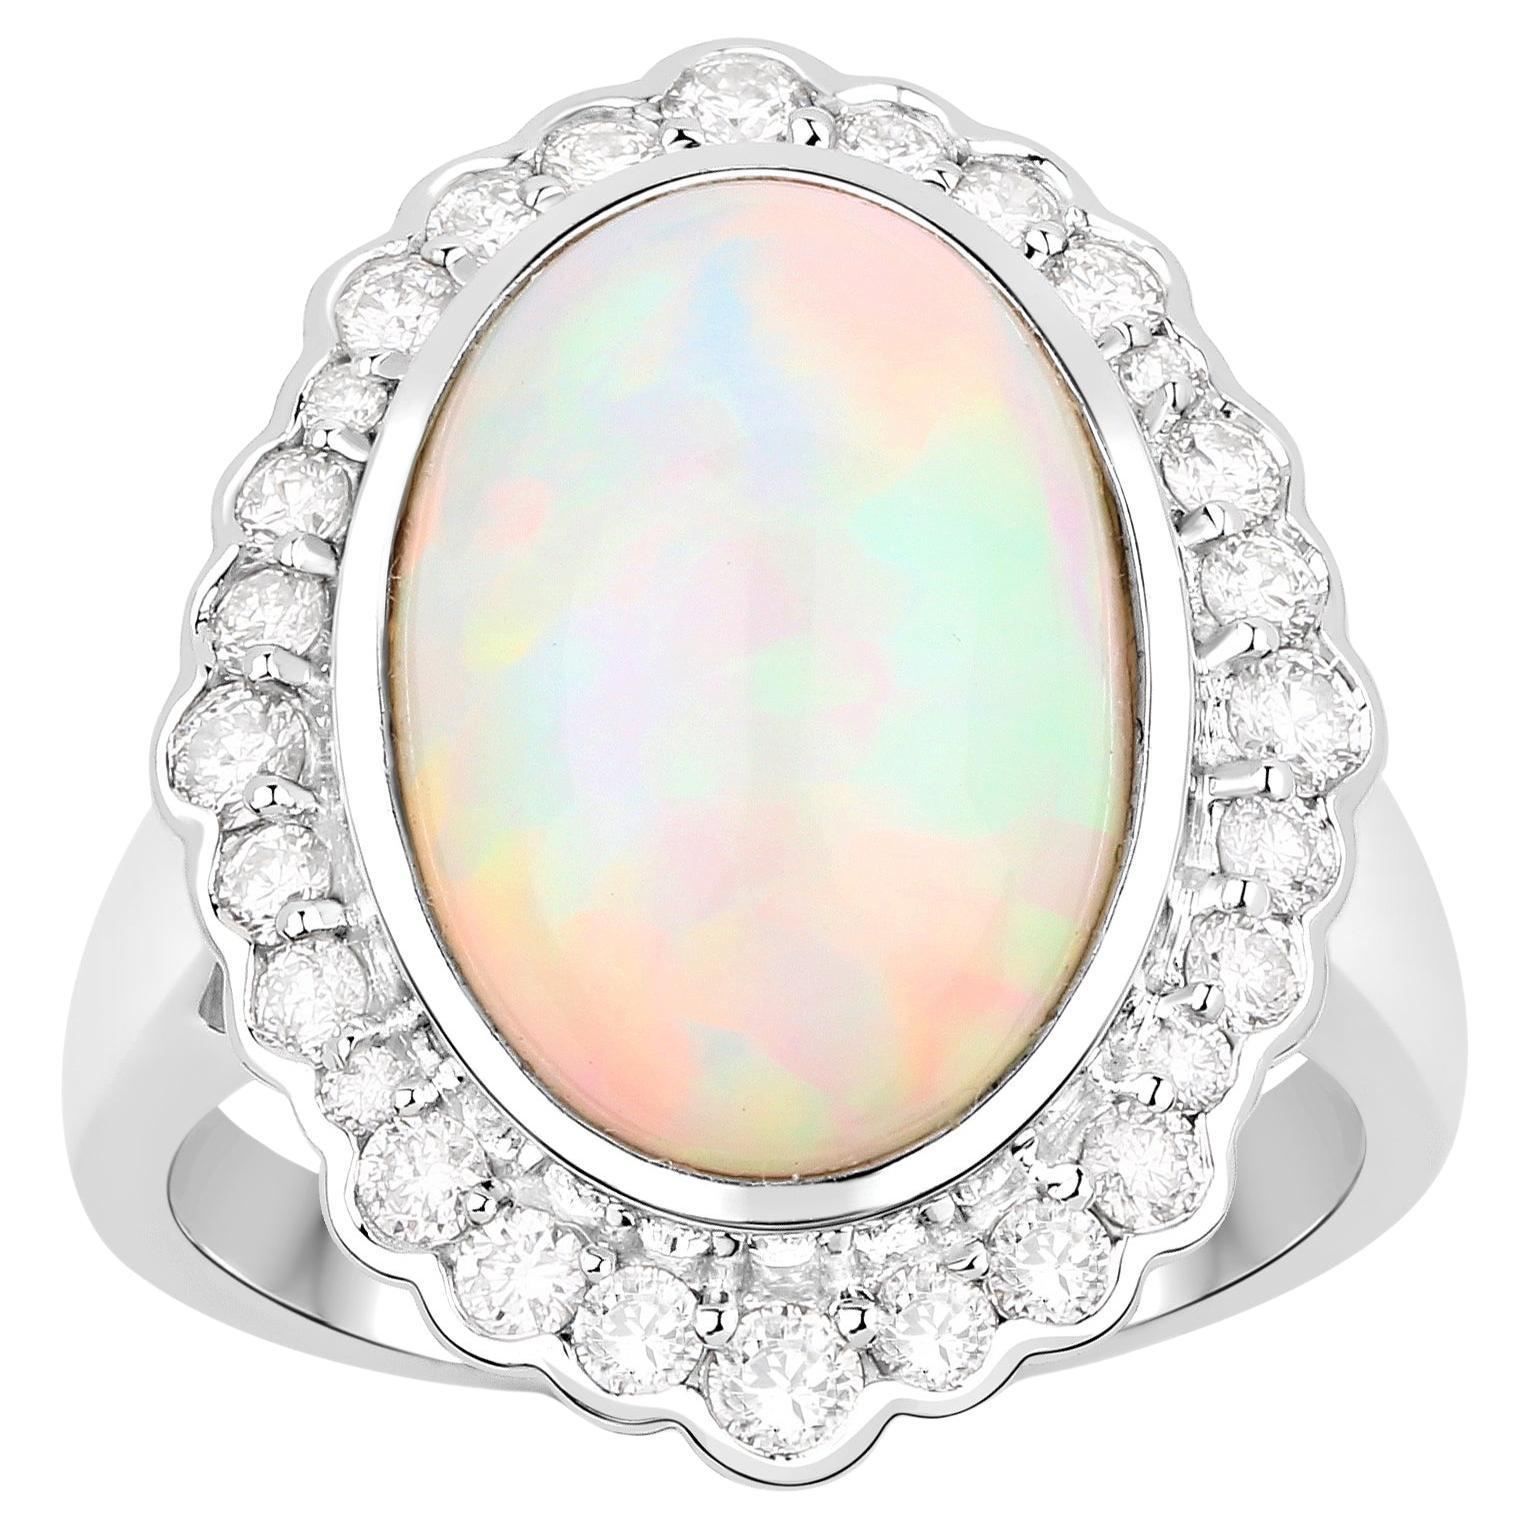 Ethiopian Opal Ring With Diamonds 6.38 Carats 14K White Gold For Sale